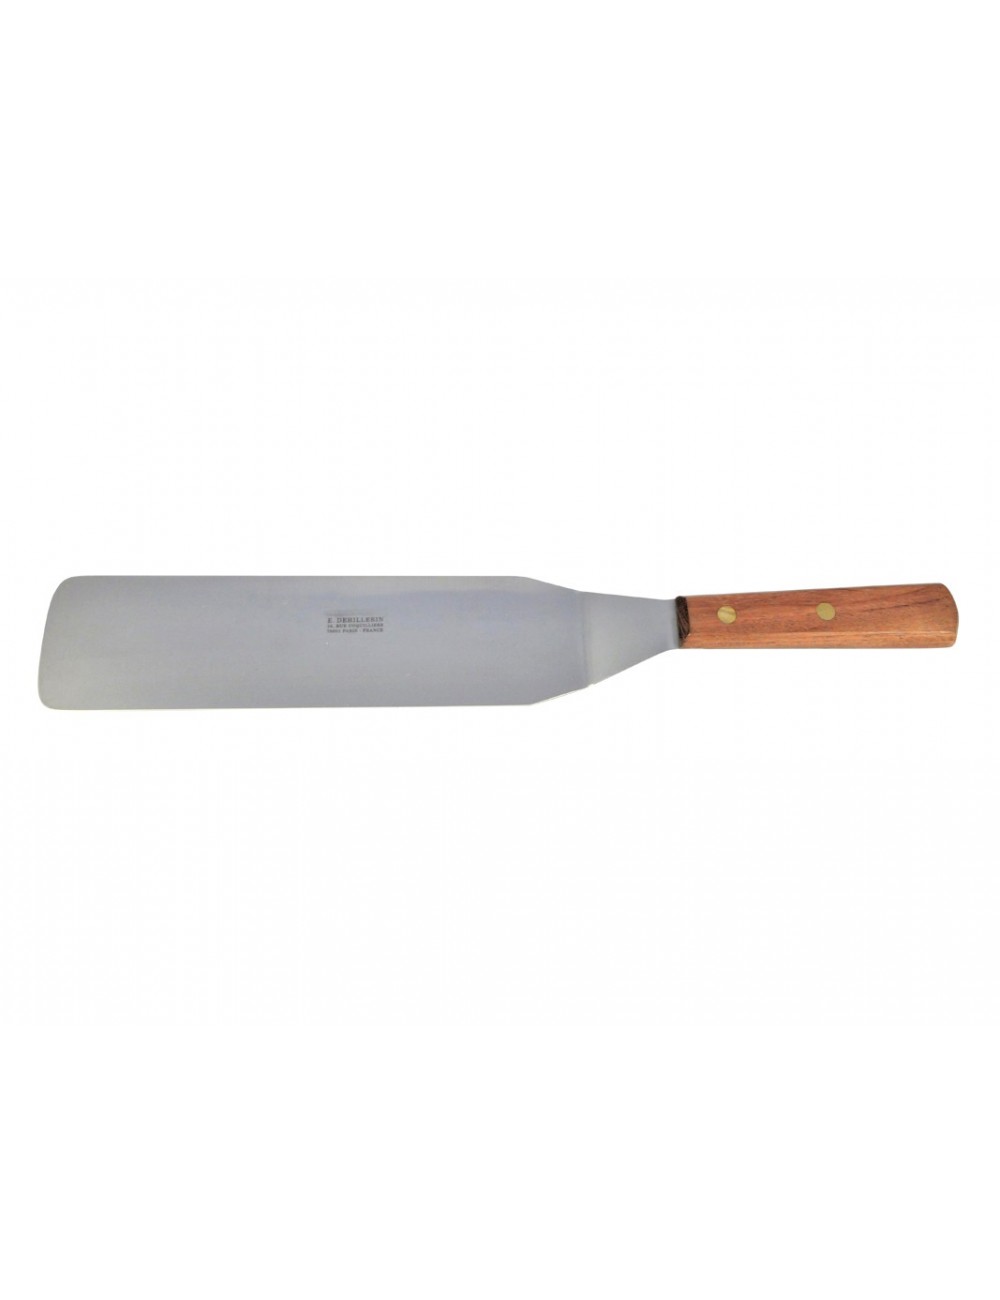 STAINLESS STEEL CURVED SPATULA - 28 CM